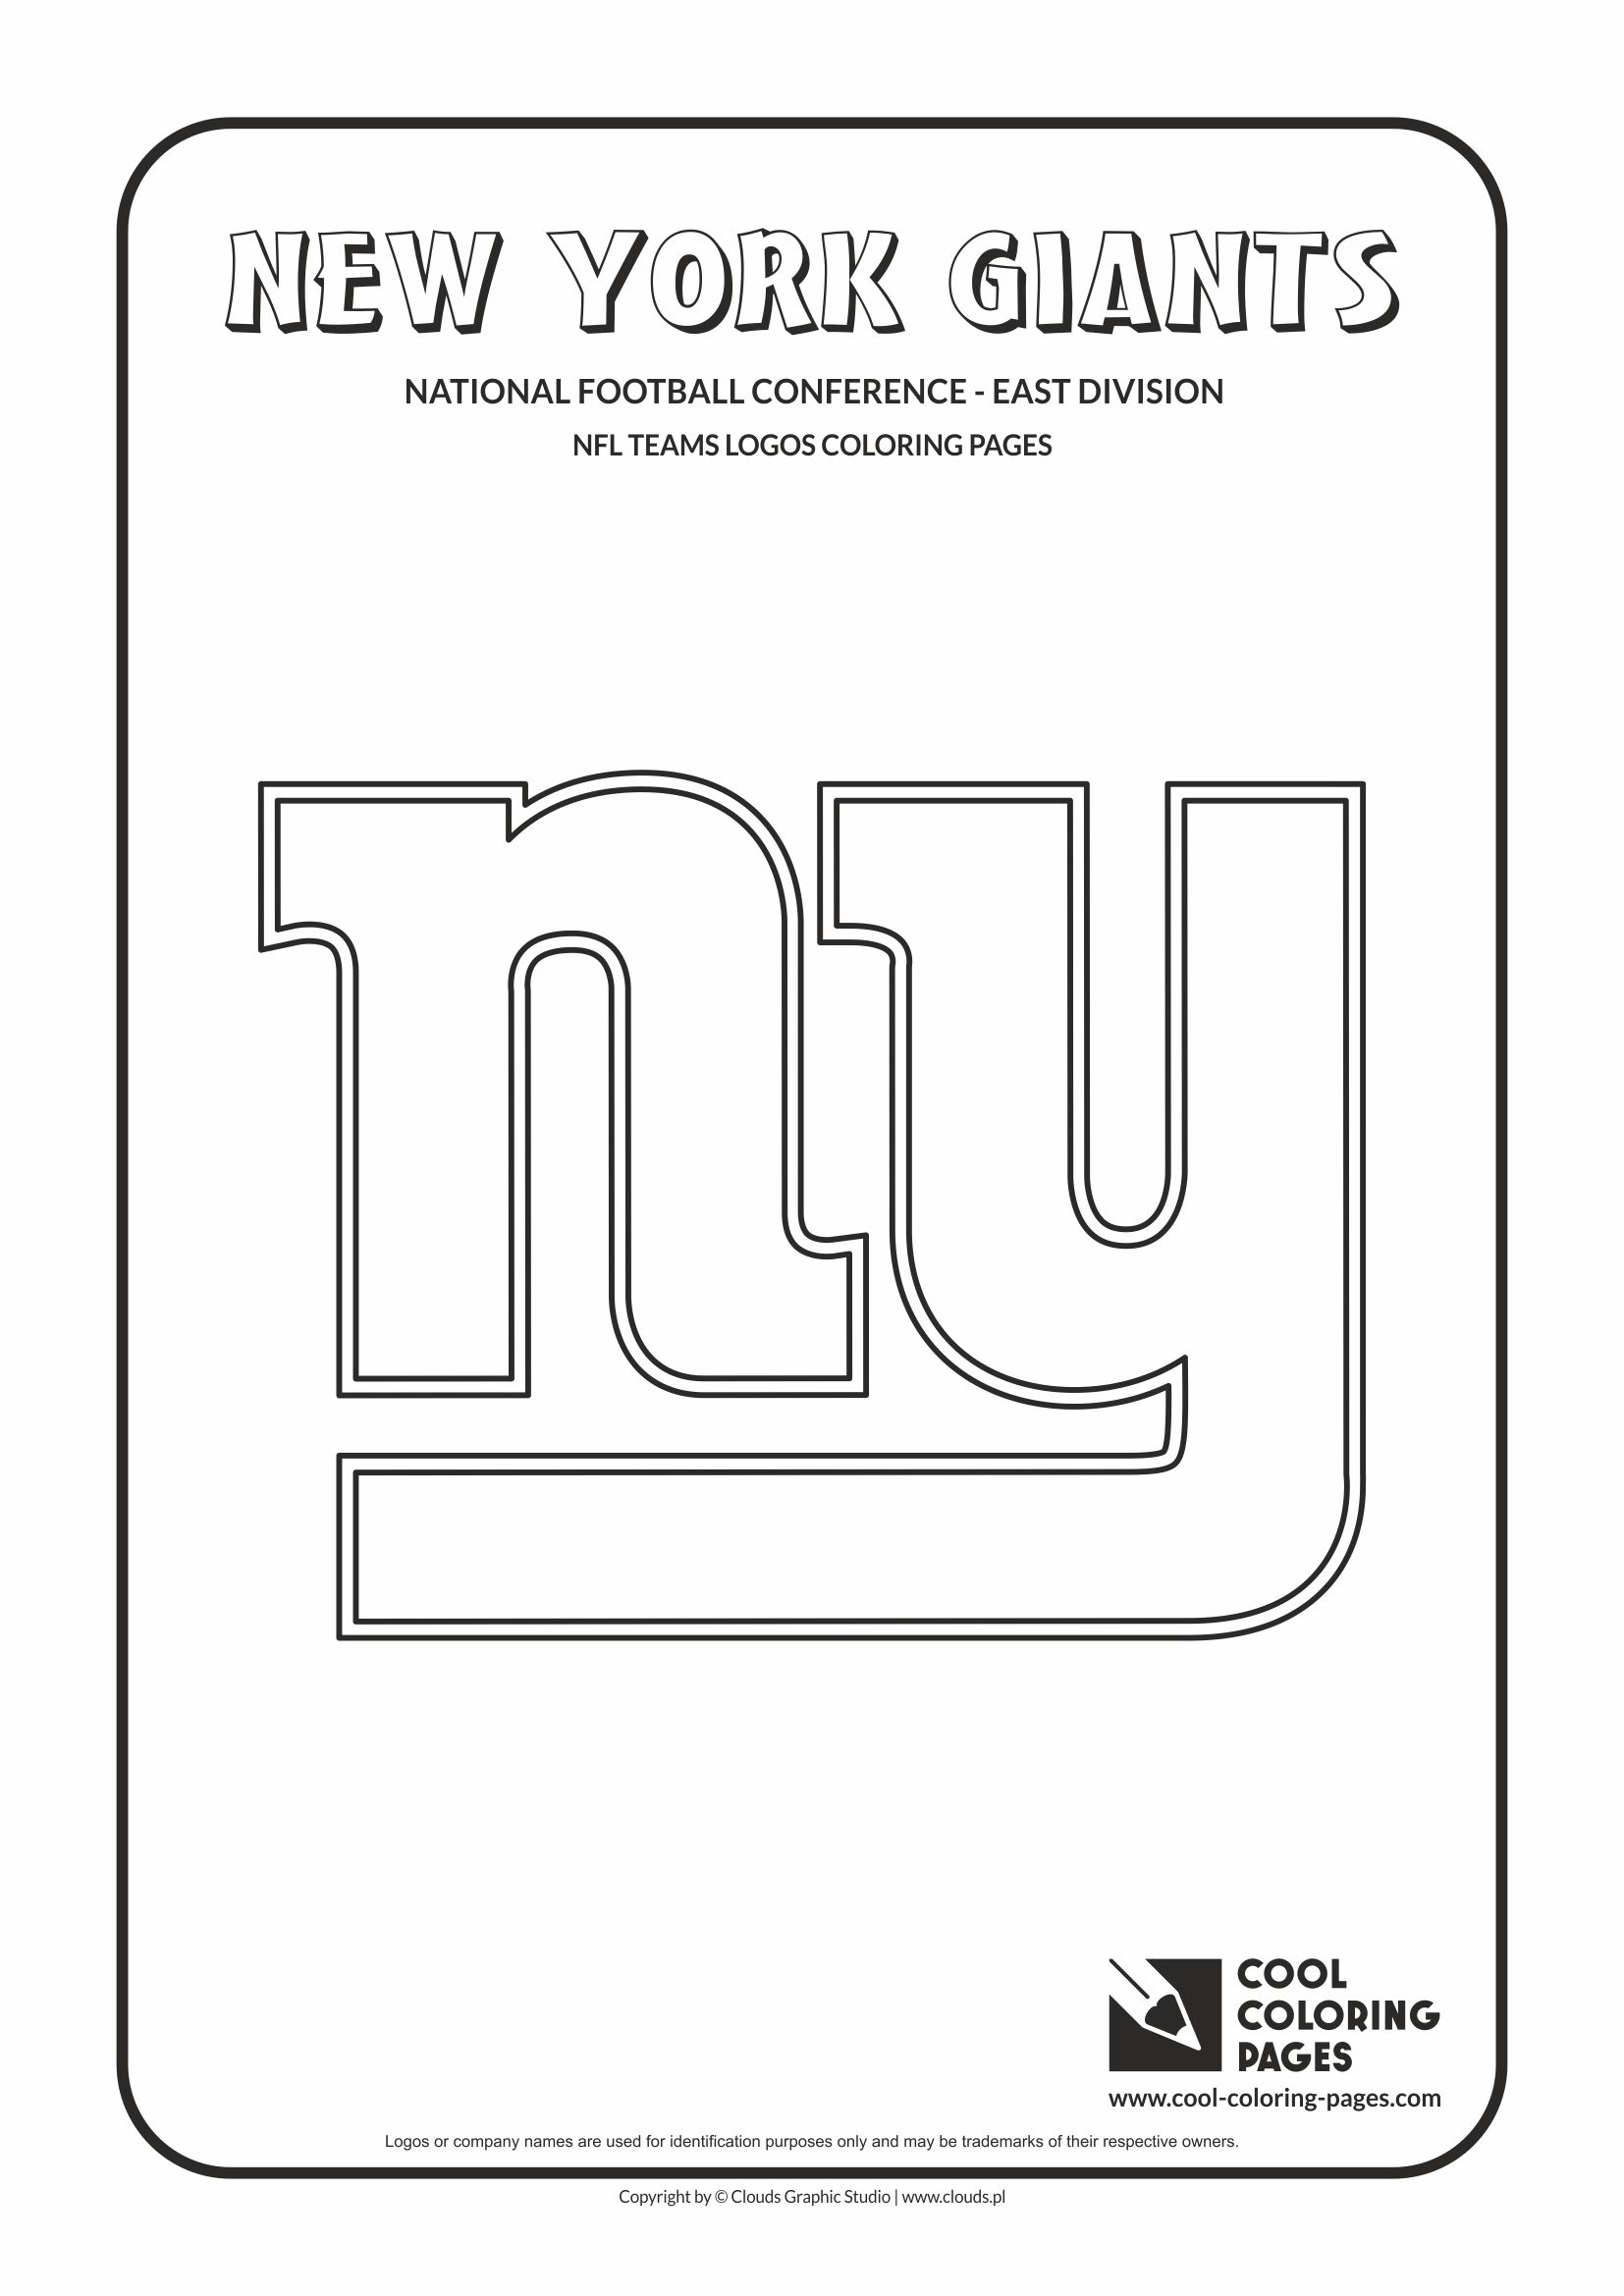 Cool Coloring Pages - NFL American Football Clubs Logos - National Football Conference - East Division / New York Giants logo / Coloring page with New York Giants logo